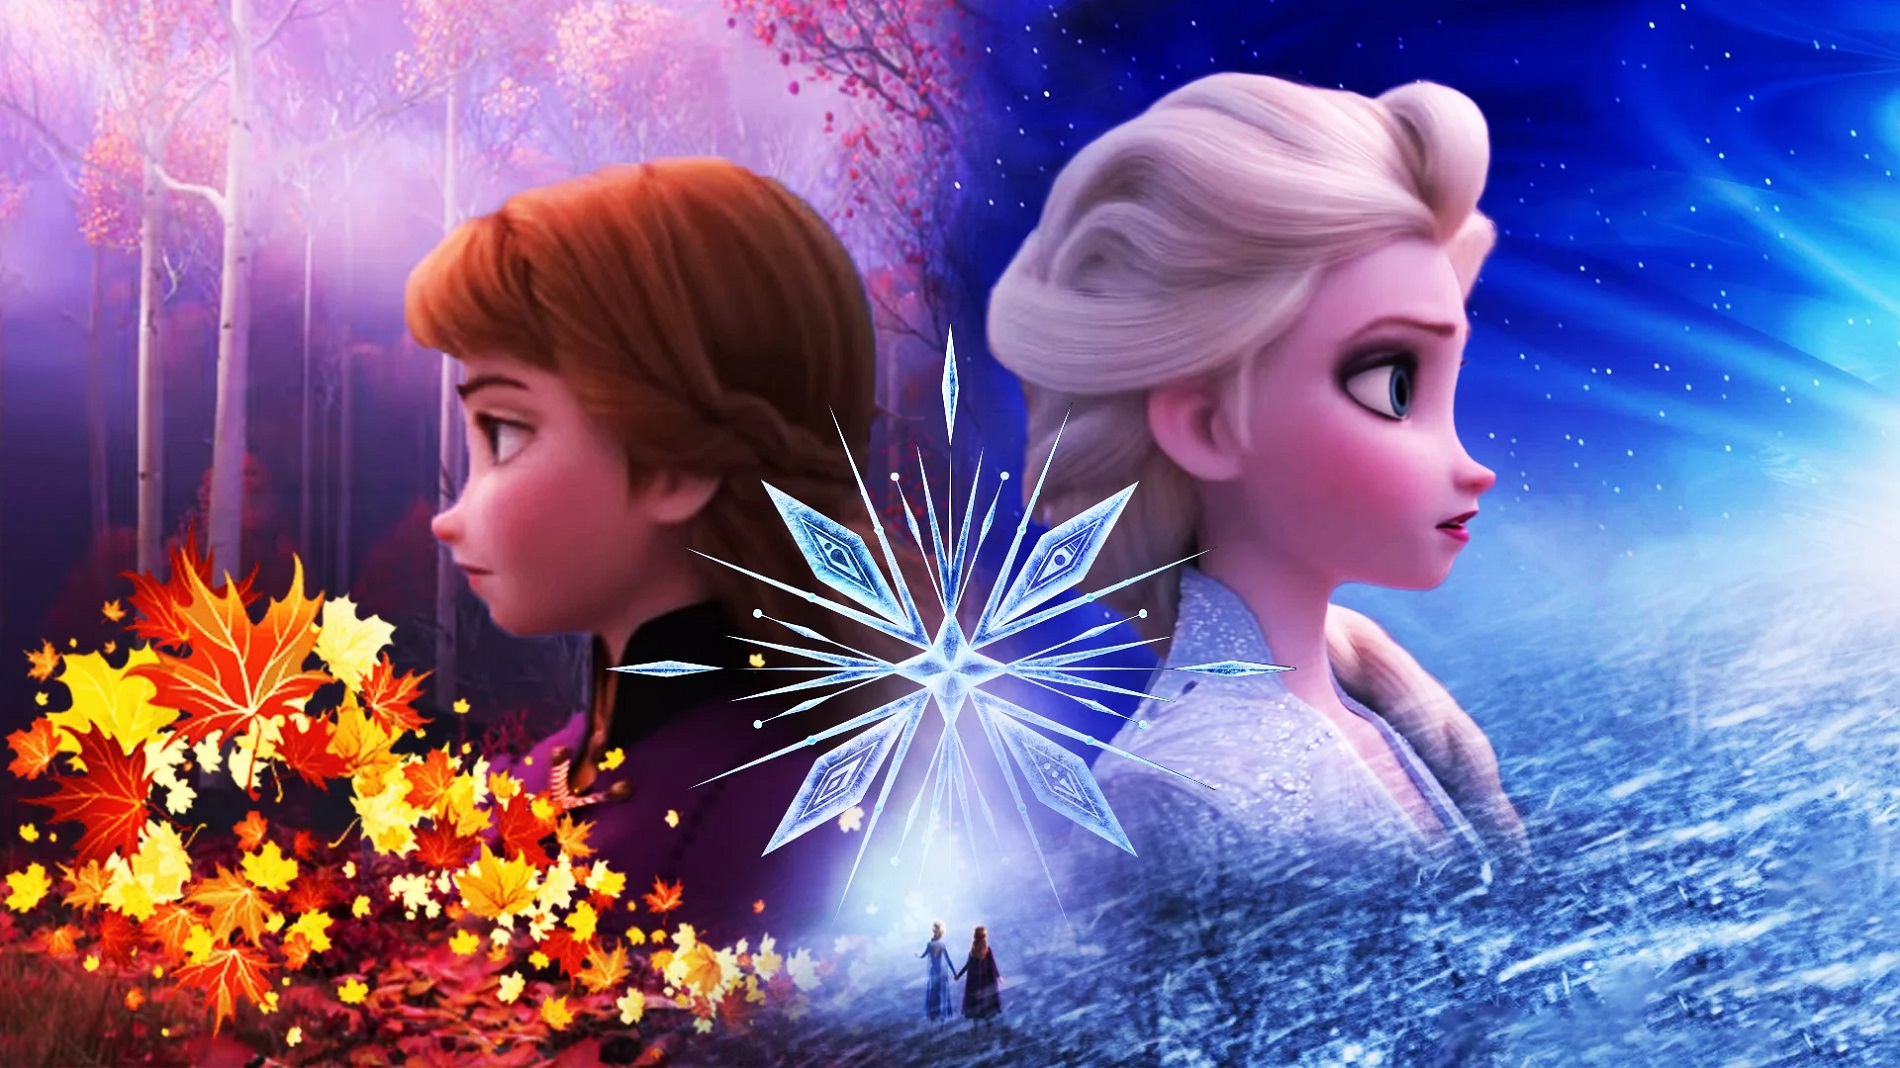 Frozen 3 Can Show A Royal Wedding Of Elsa s Sister Anna And Kristoff